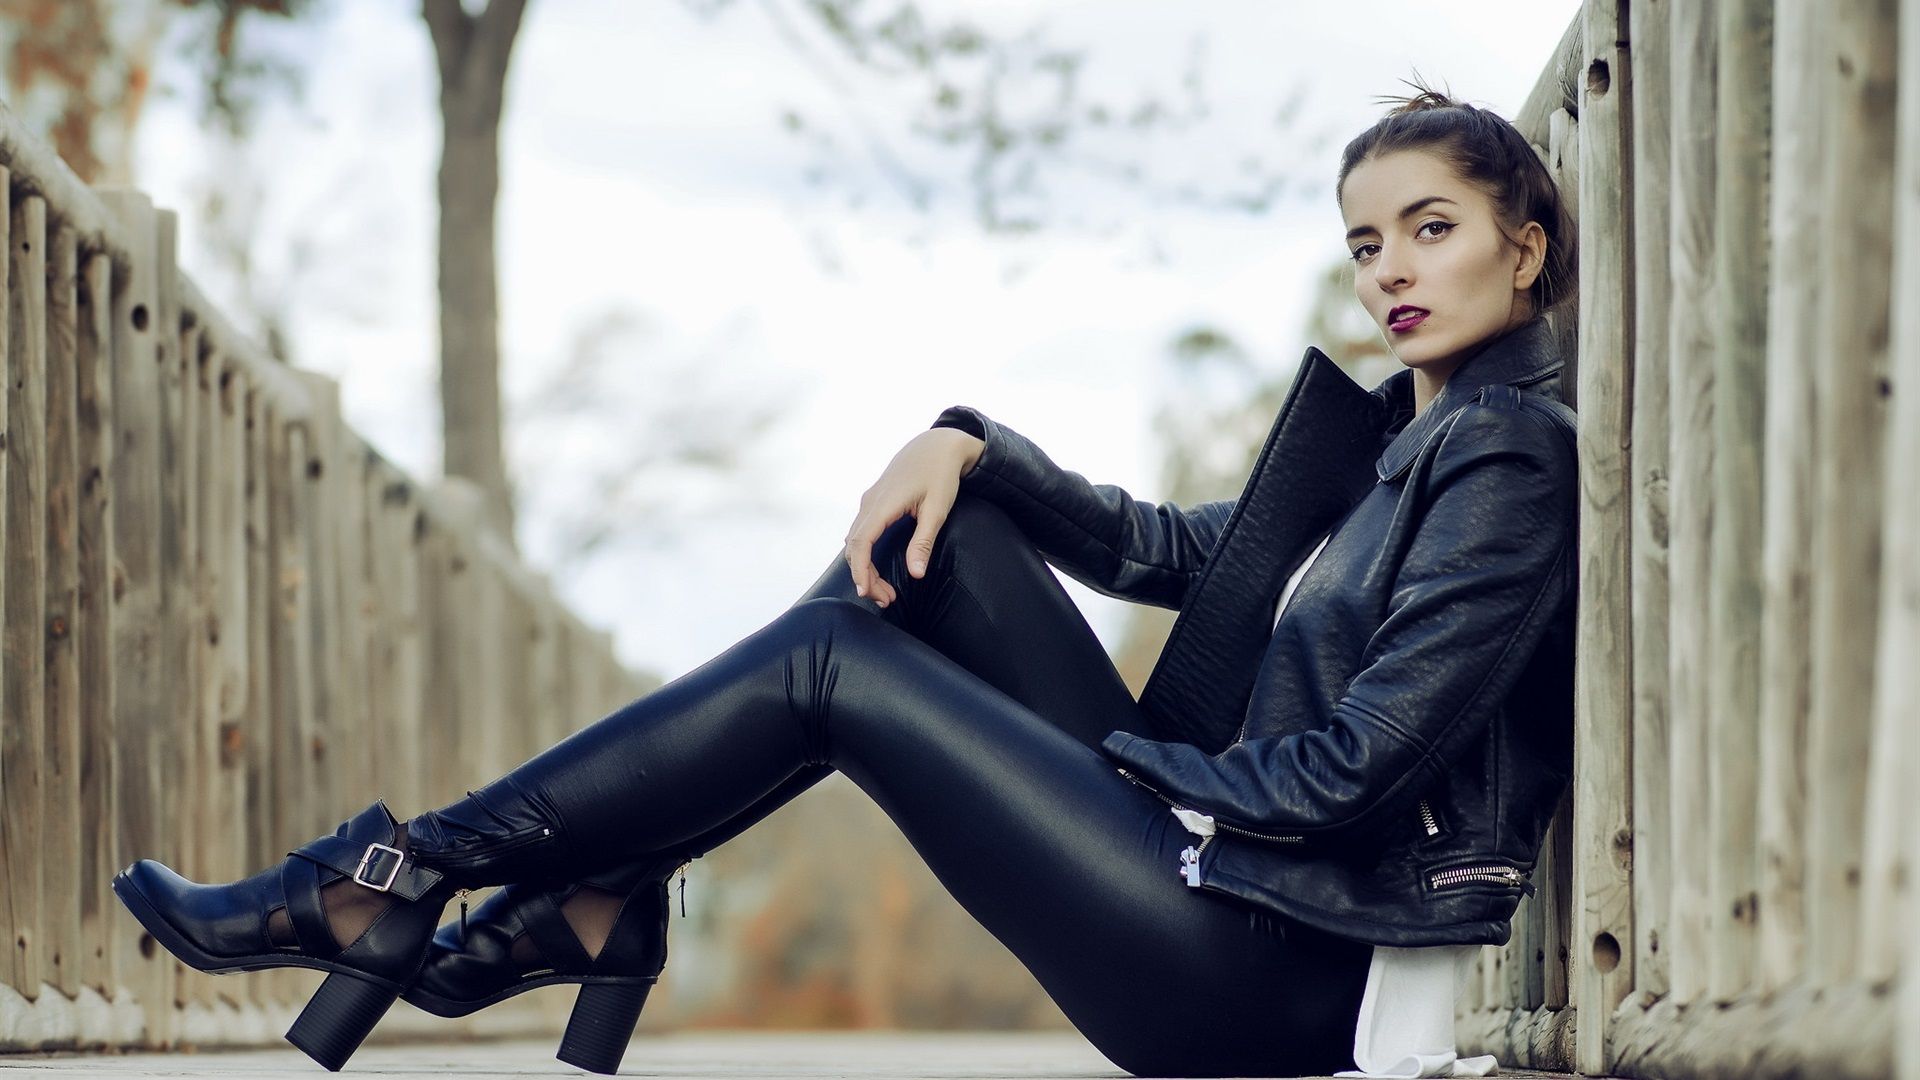 Wallpaper Black leather jacket girl, sit on ground 1920x1200 HD